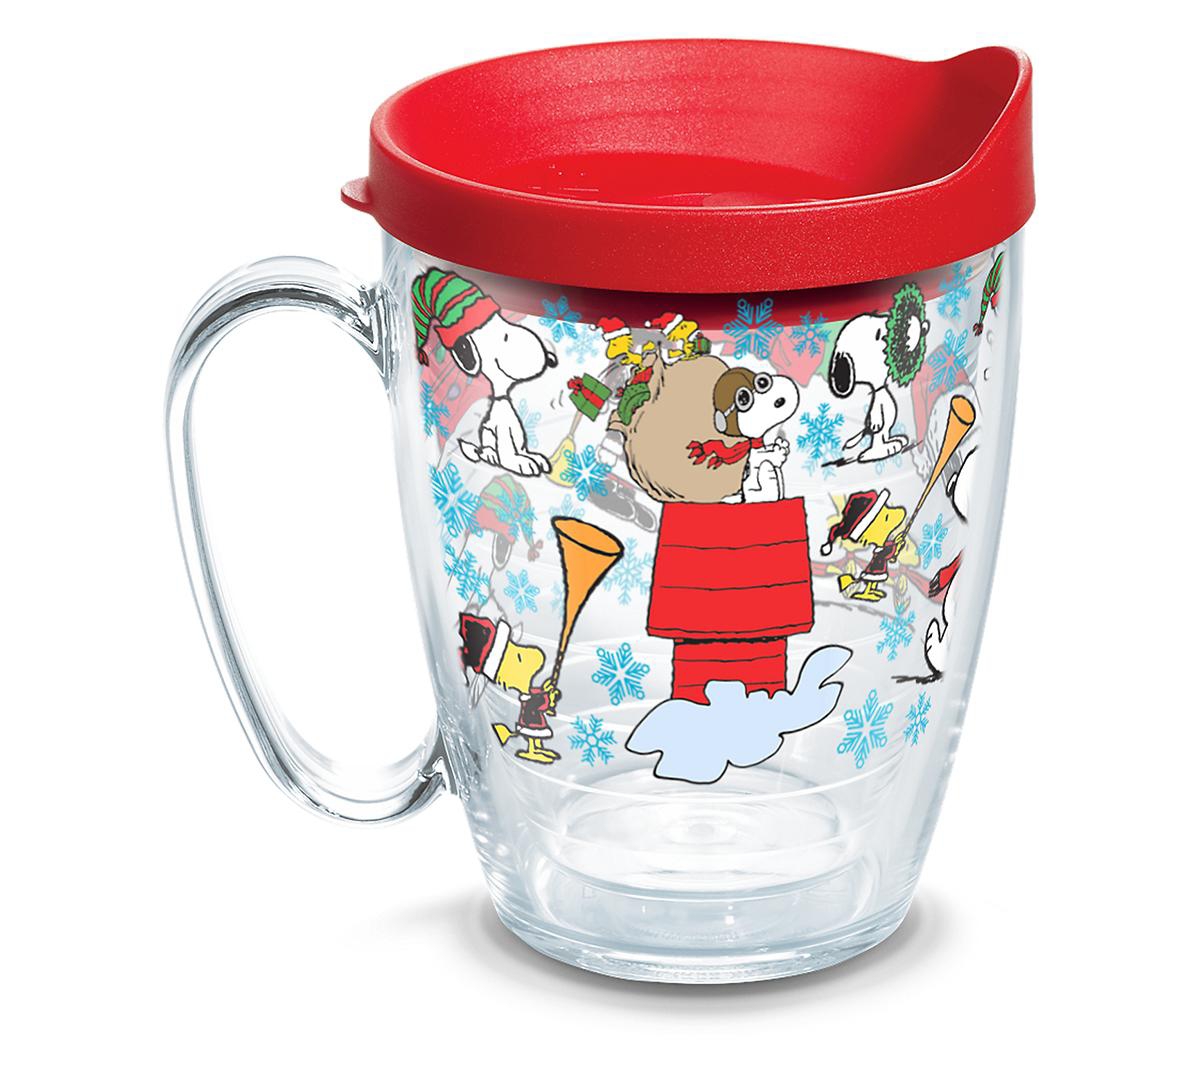 Tervis Tumbler Tervis Peanuts Christmas Collage Made In Usa Double Walled Insulated Tumbler Travel Cup Keeps Drinks In Open Miscellaneous